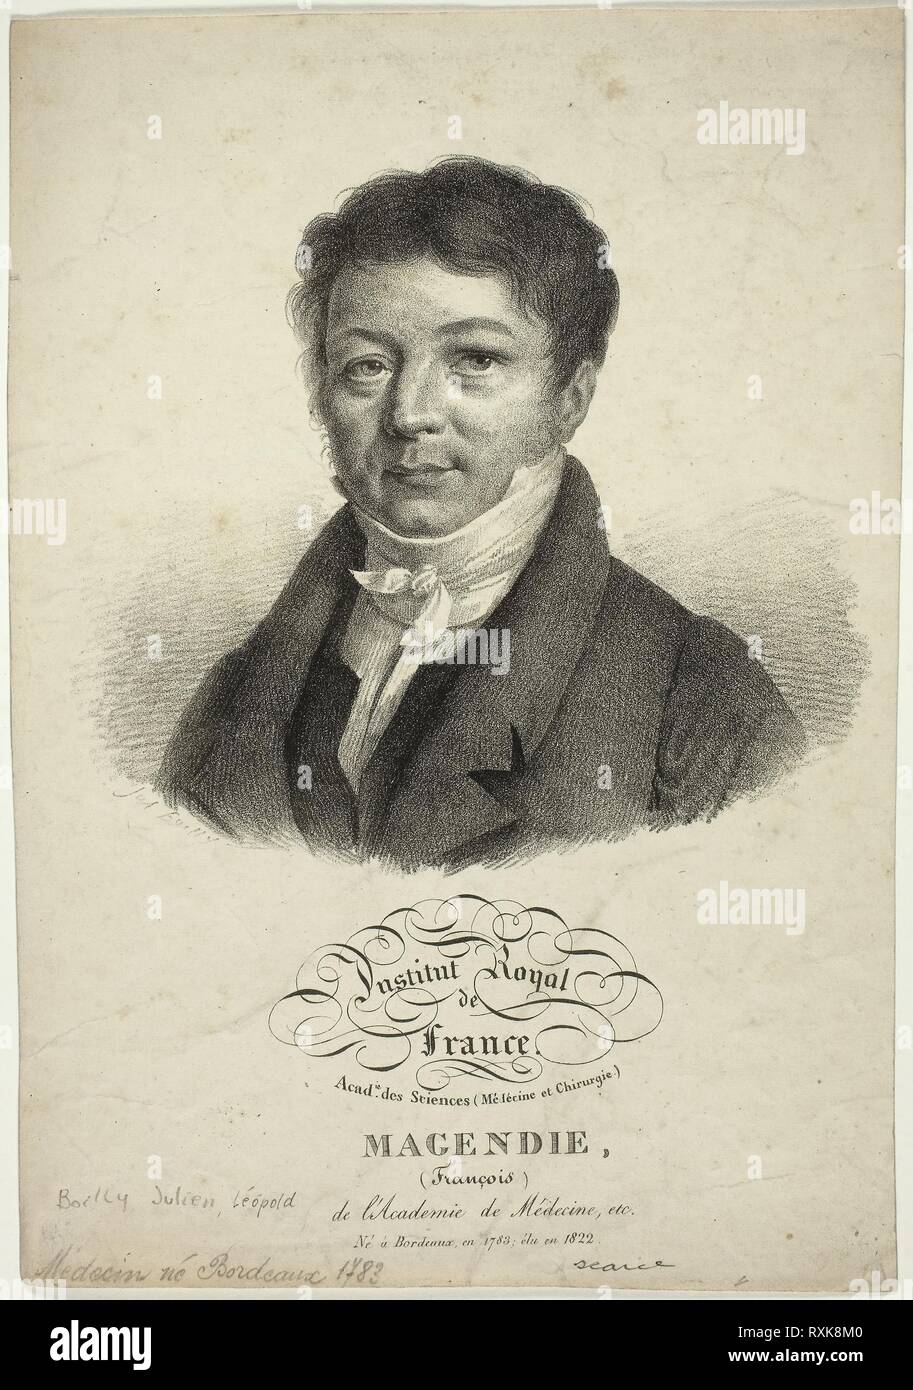 Portrait of François Magendie. Jules Boilly; French, 1786-1874. Date: 1817-1827. Dimensions: 156 × 174 mm (image); 278 × 194 mm (sheet). Lithograph in black on ivory wove paper. Origin: France. Museum: The Chicago Art Institute. Stock Photo